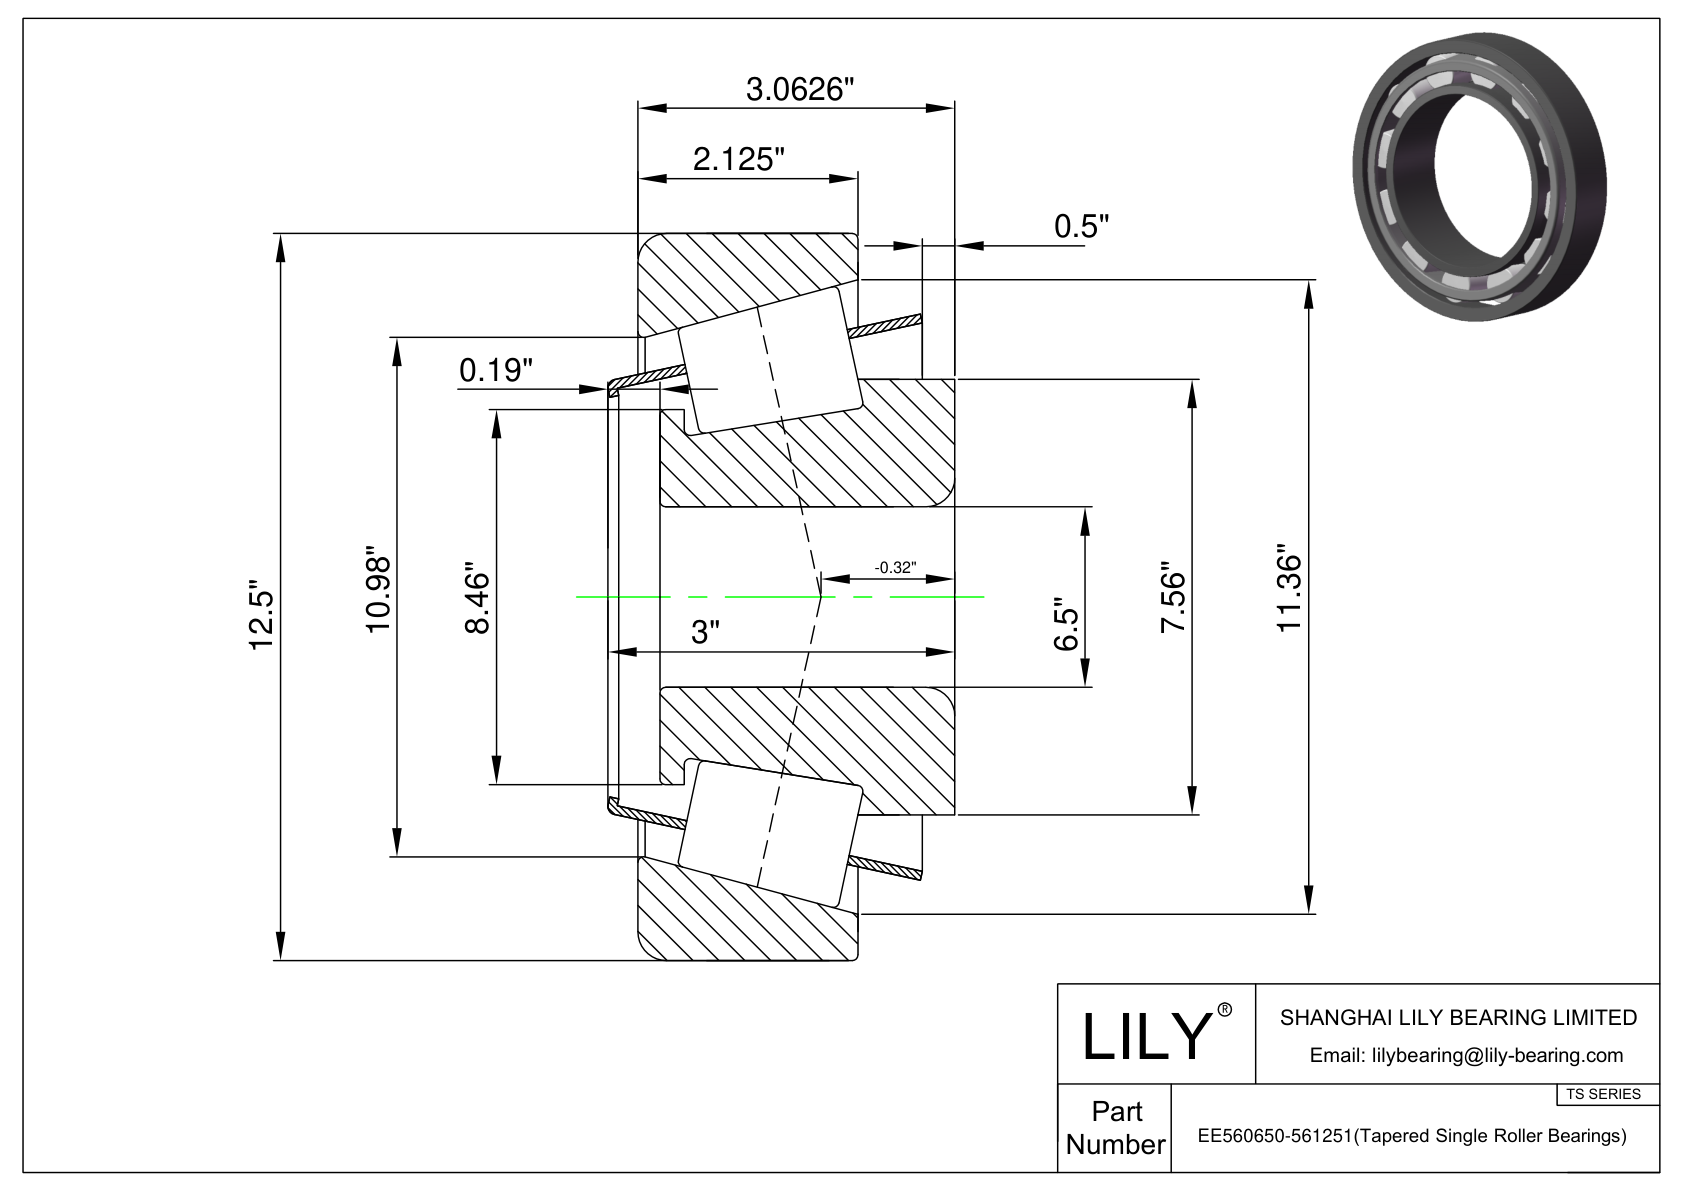 EE560650-561251 TS (Tapered Single Roller Bearings) (Imperial) cad drawing